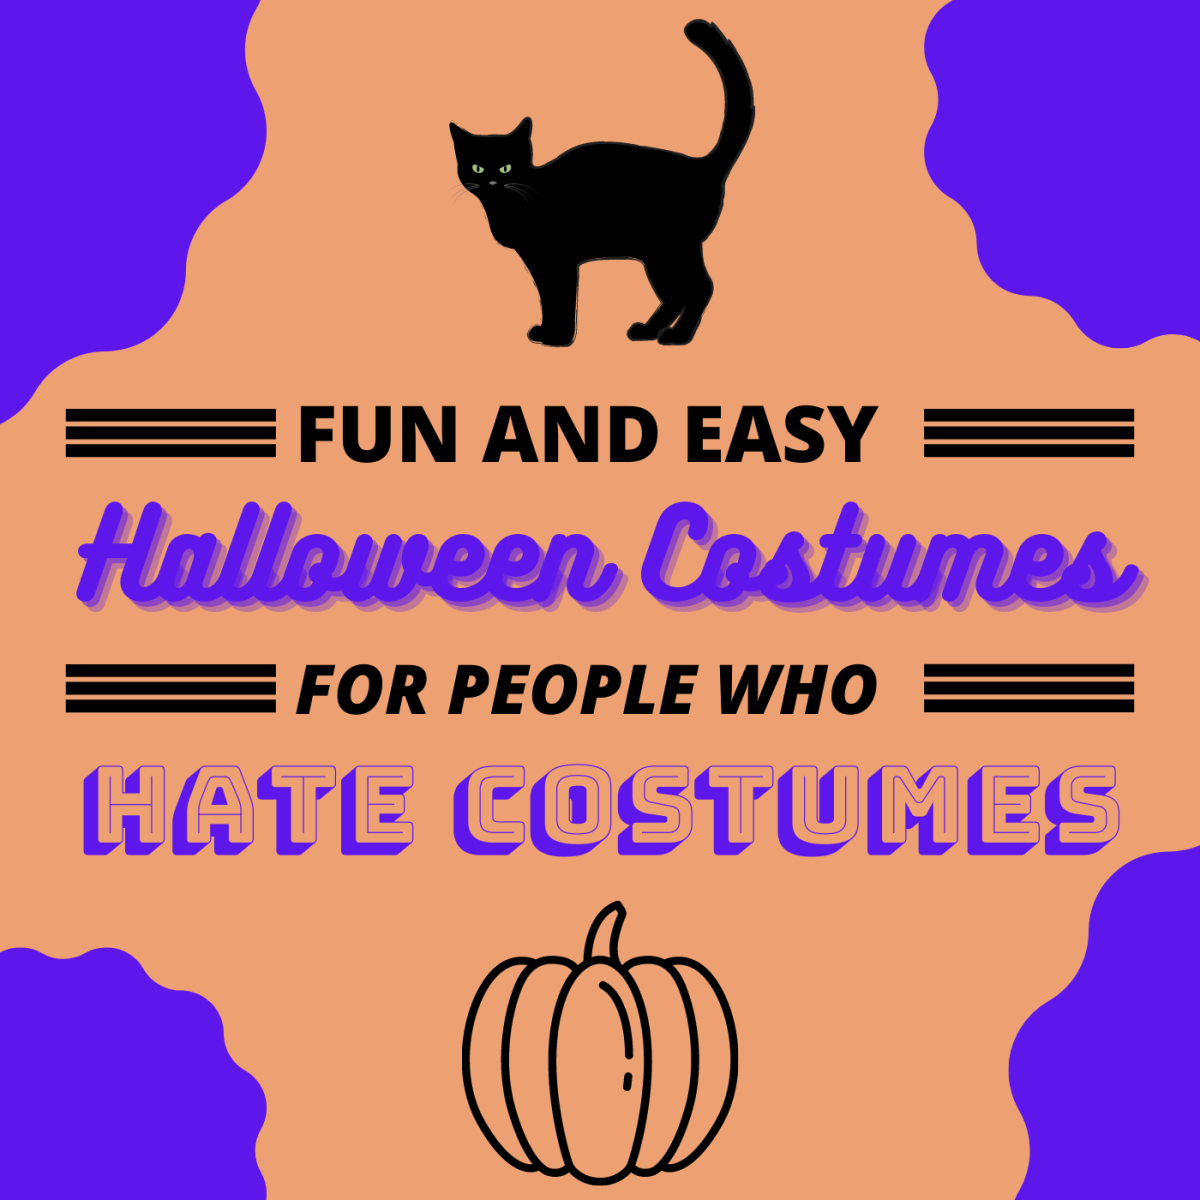 Easy Halloween Costume Ideas for People Who Hate Costumes